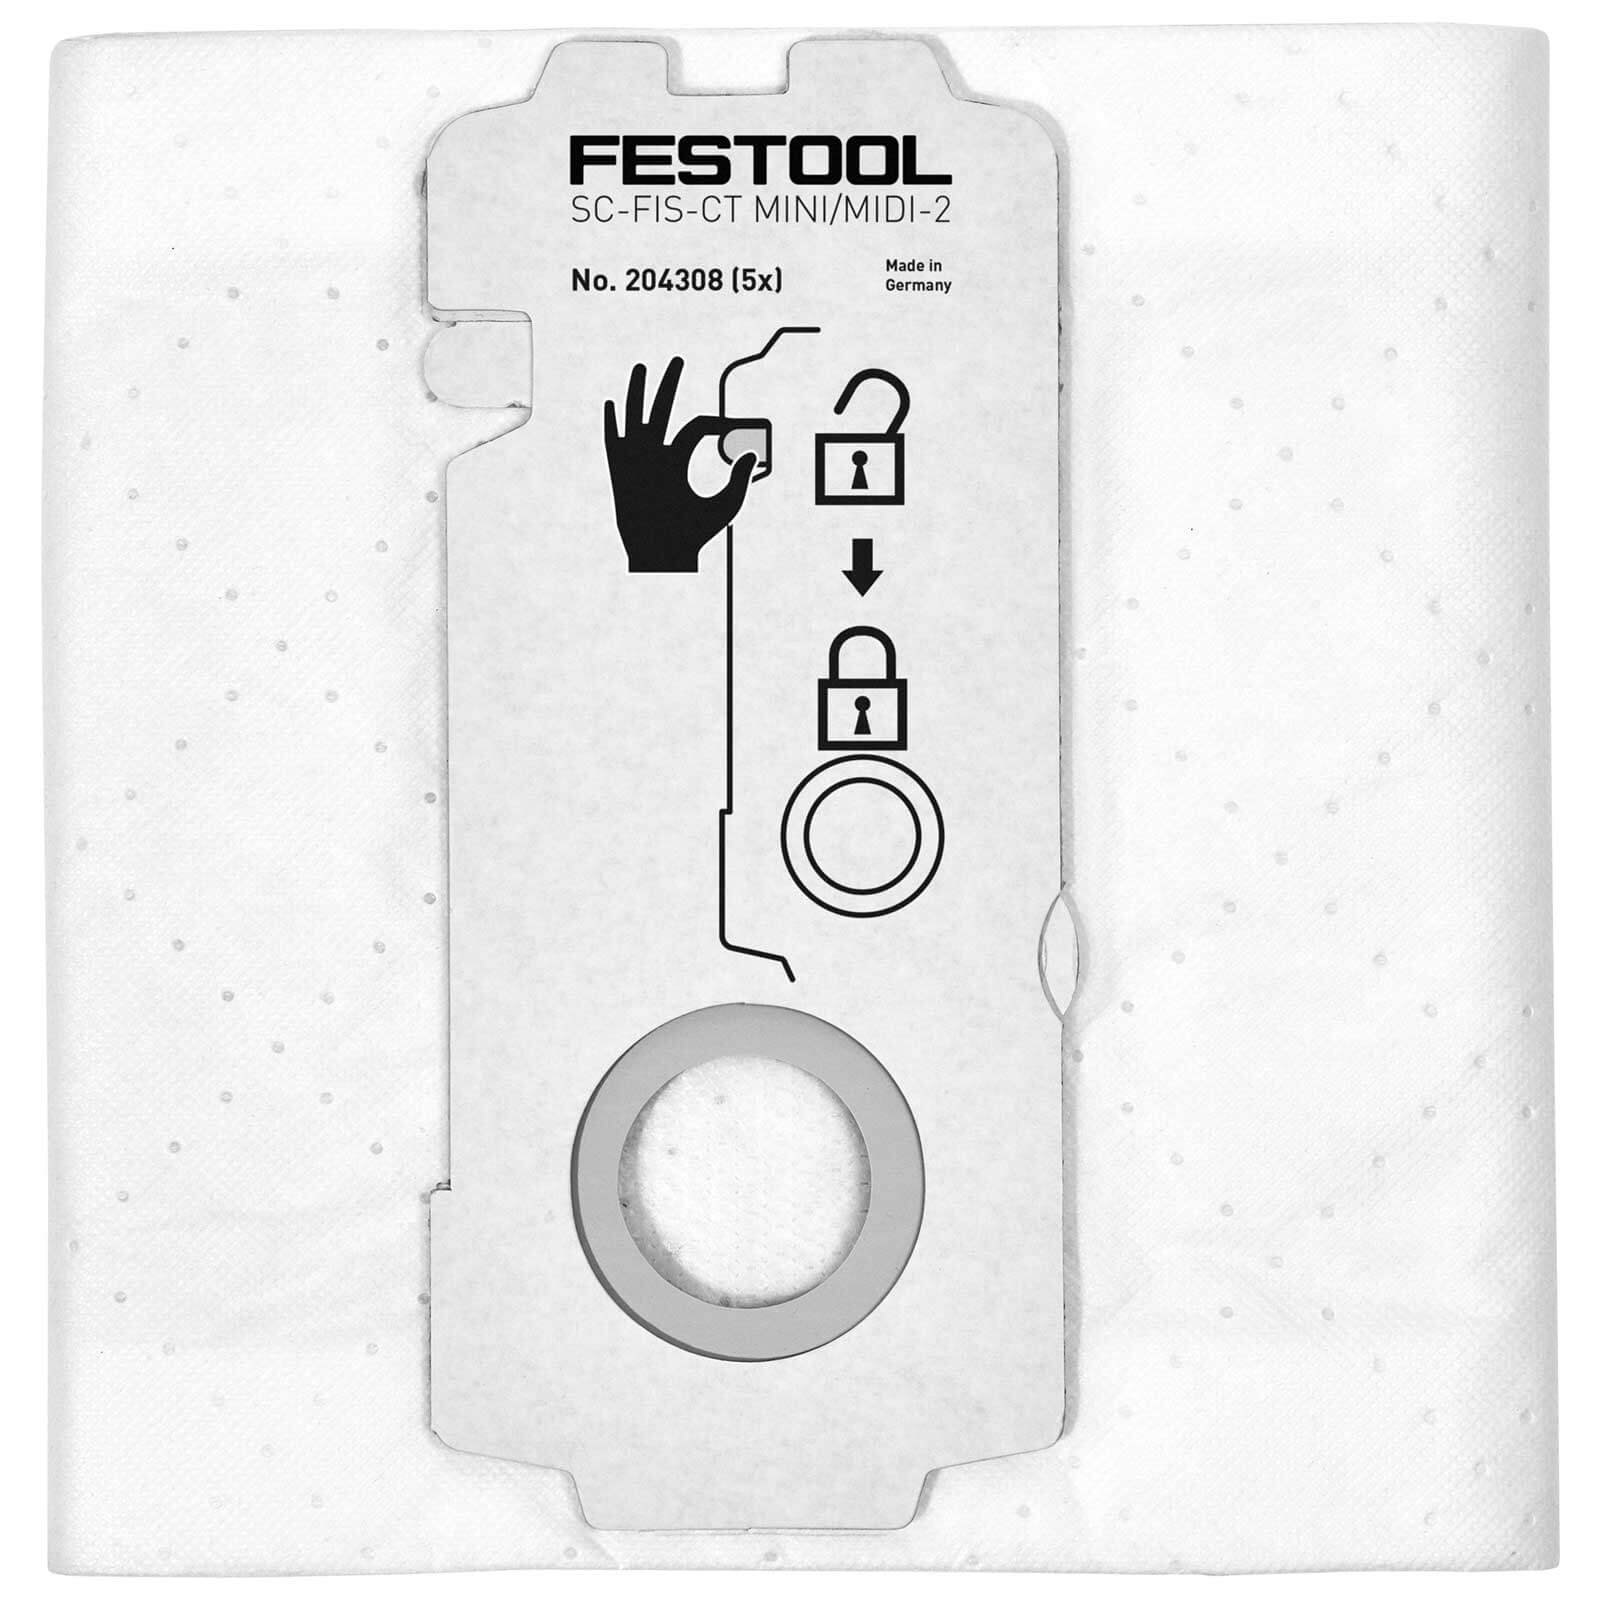 Photos - Other household chemicals Festool SC-FIS-CT Mini/Midi Self Clean Dust Extractor Filter Bag Pack of 5 